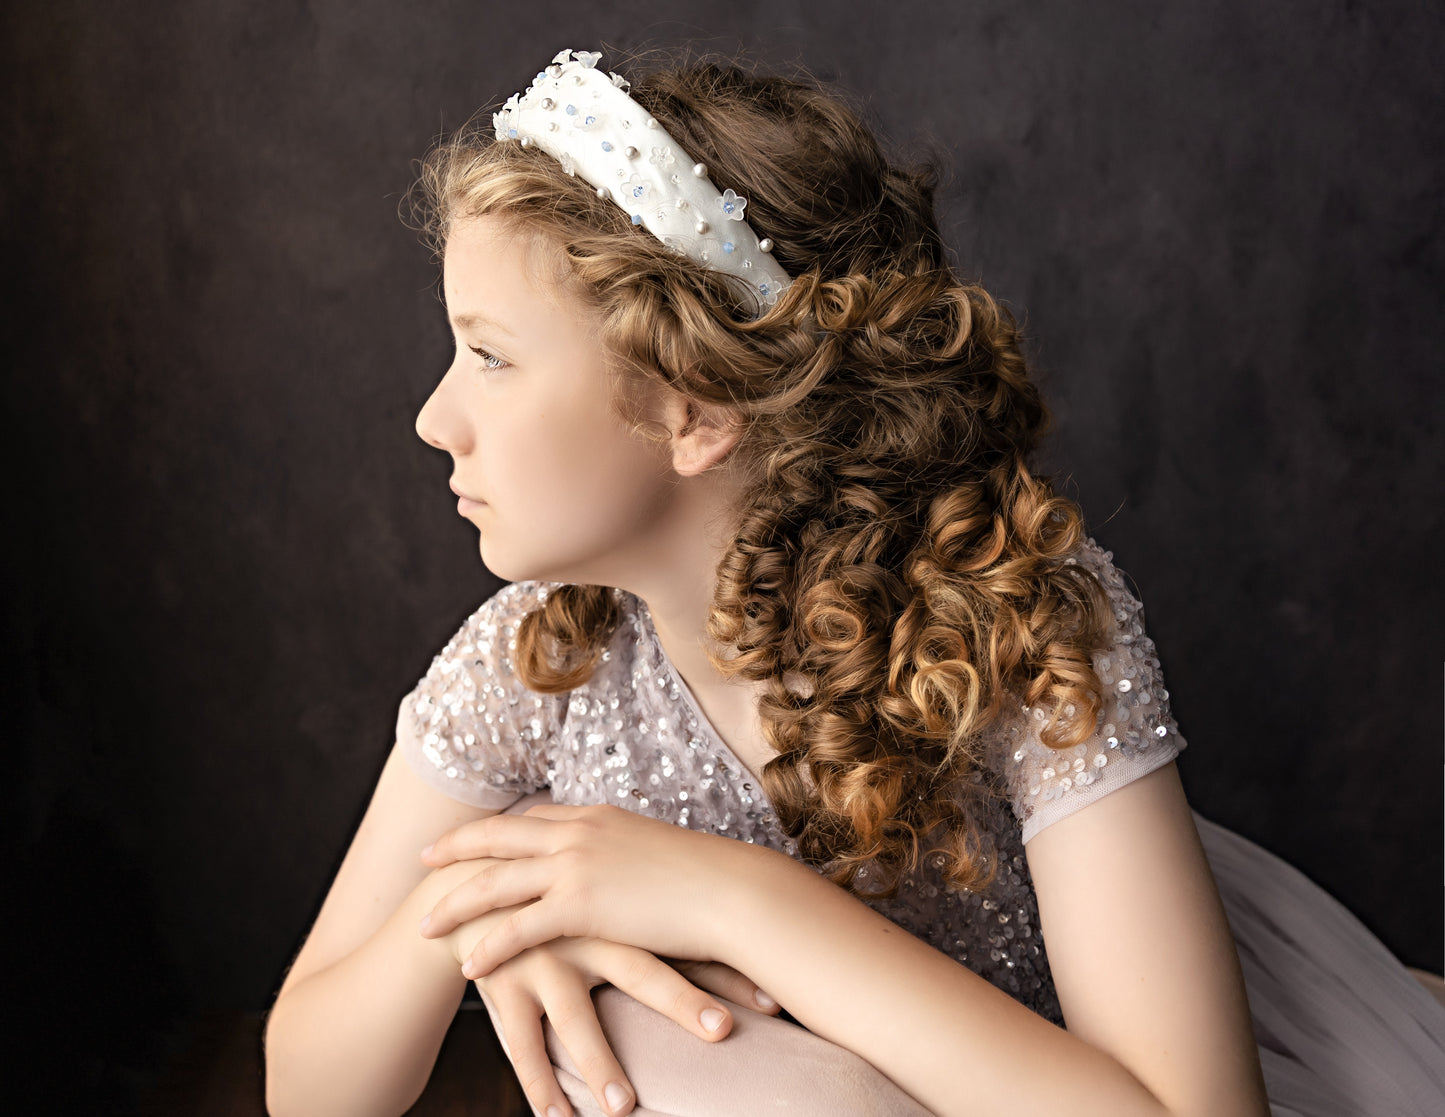 Forget Me Not Padded Headband